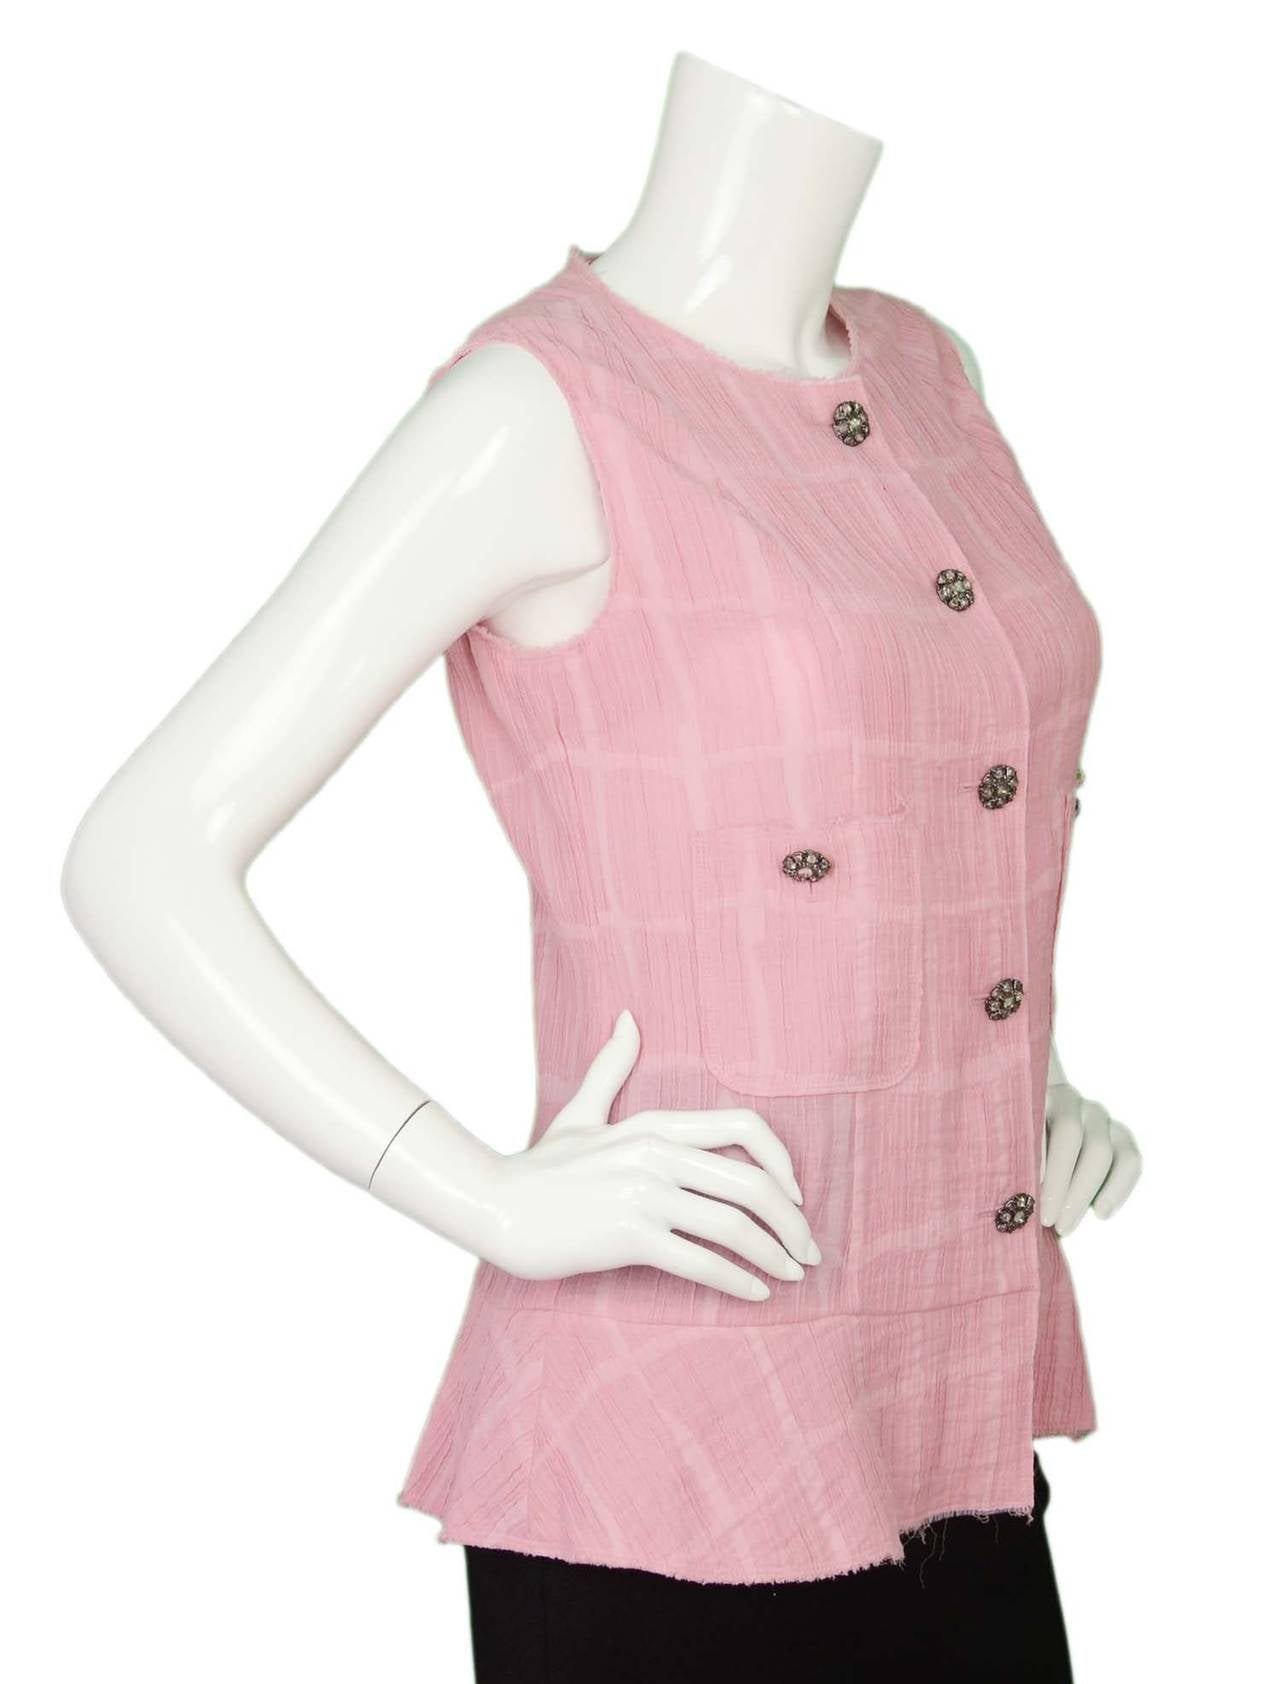 Chanel Pale Pink Dropped Waist Vest/Tunic
Features silvertone and poured glass buttons
Made in: France
Color: Pale pink 
Composition: 48% cotton, 32% rayon, 20% nylon
Lining: None
Closure/opening: Front center button up
Exterior Pockets: Two